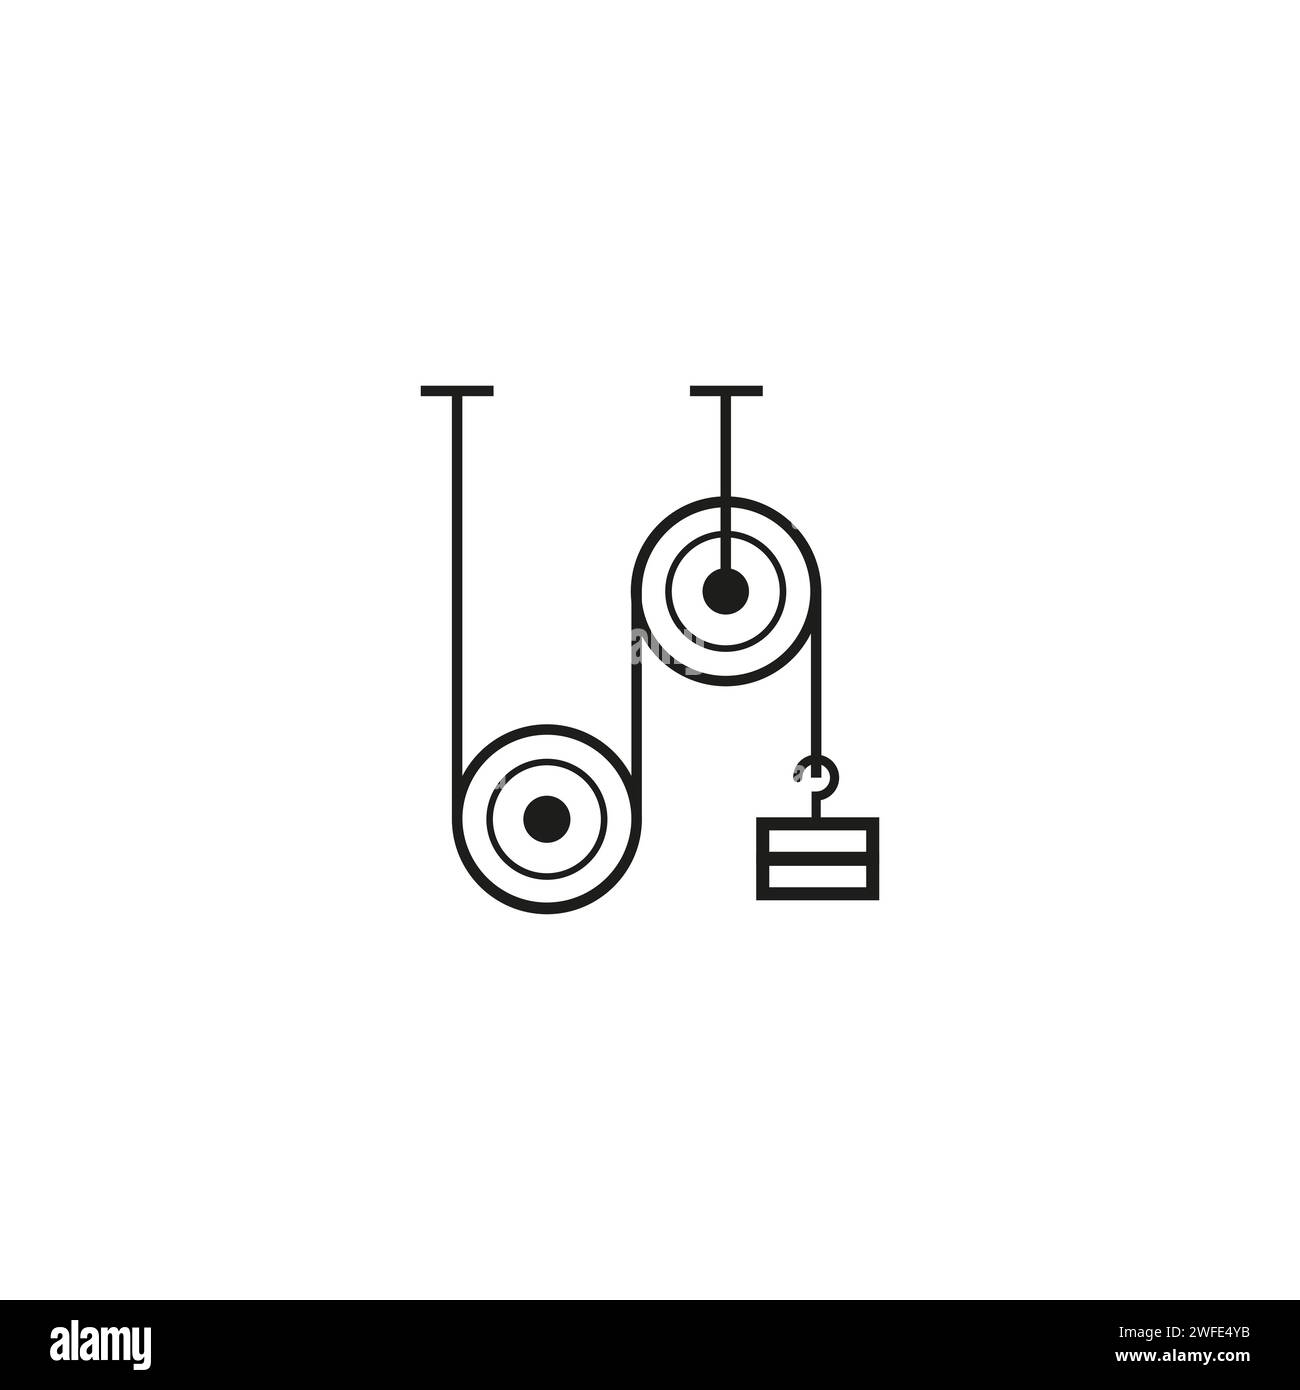 Rope And Pulley System icon. Pulley Weight Icon. Vector illustration. stock image. EPS 10. Stock Vector